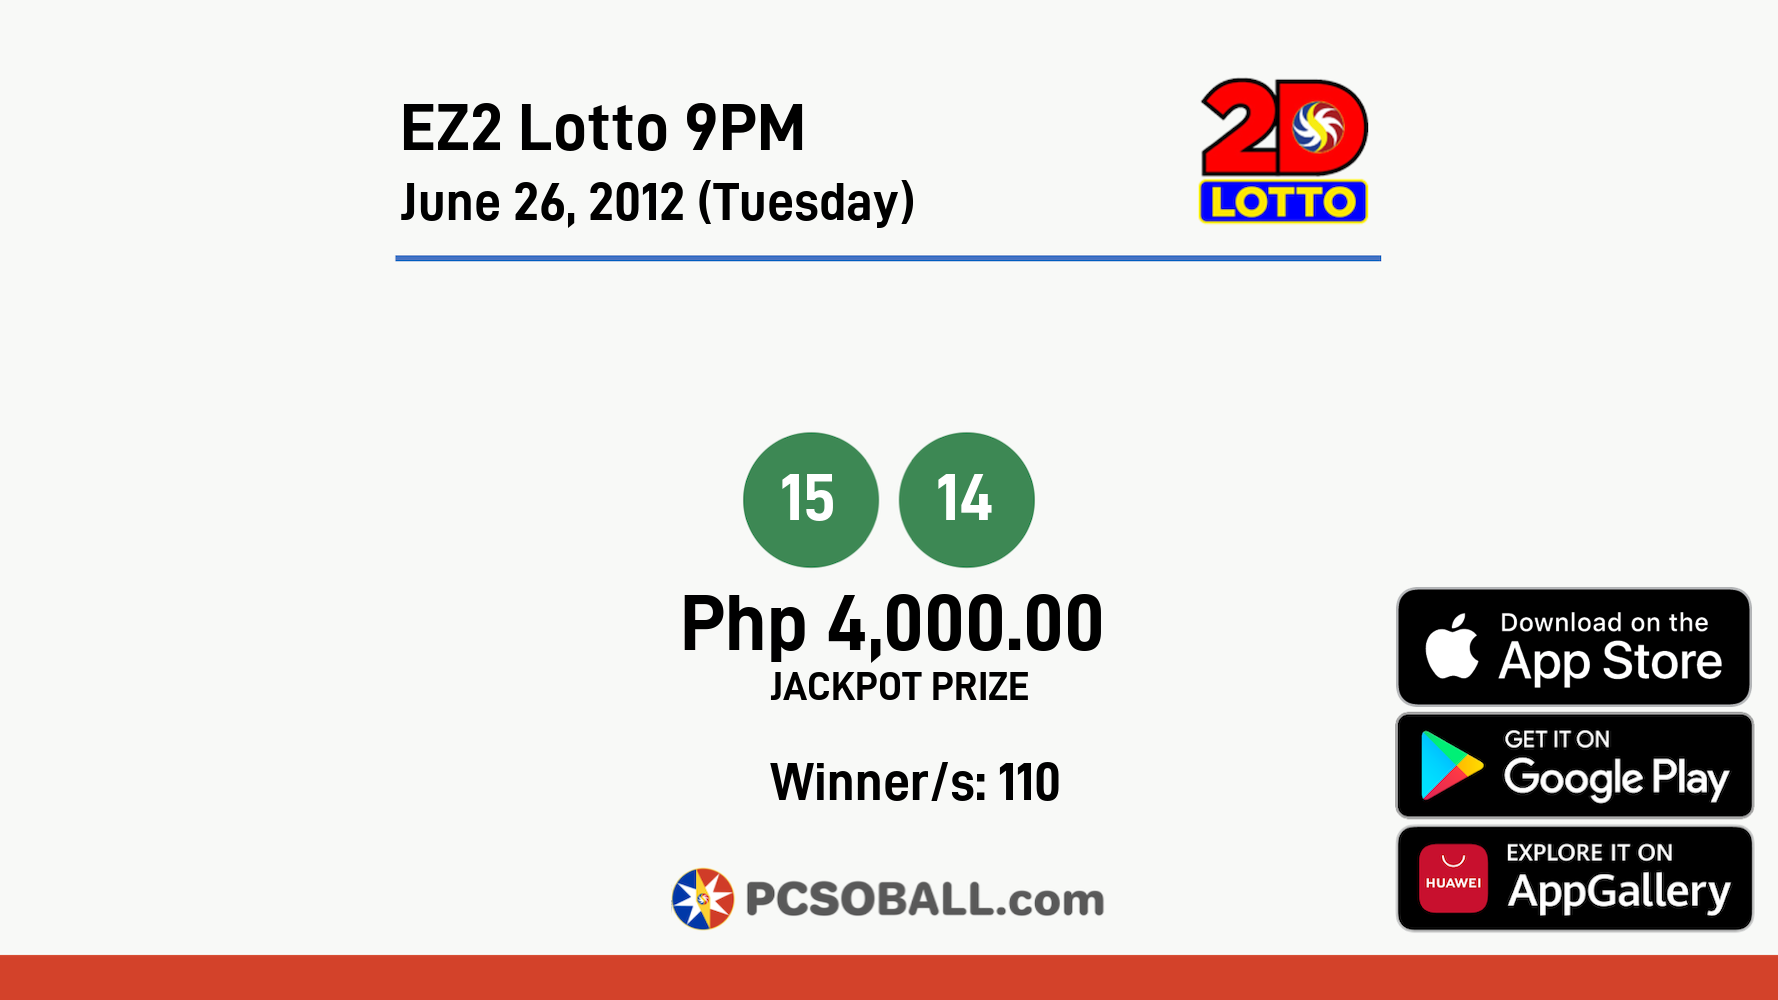 EZ2 Lotto 9PM June 26, 2012 (Tuesday) Result